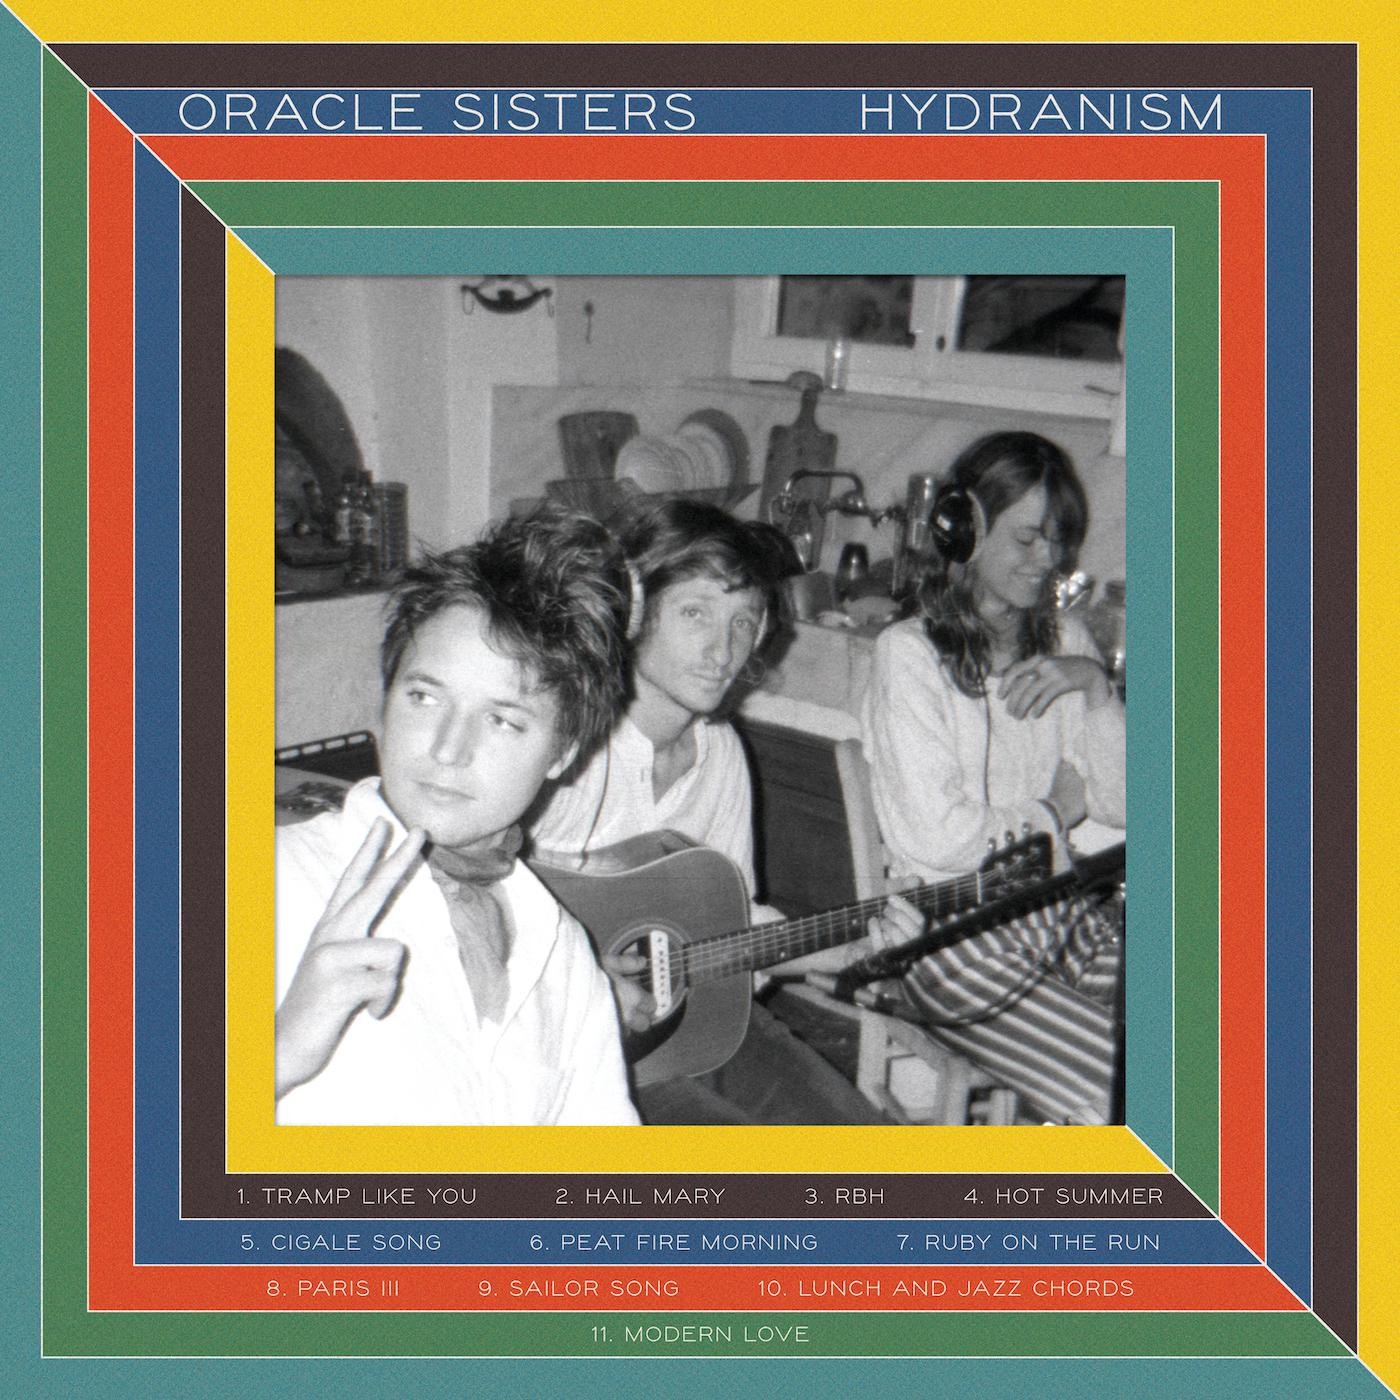 Hydranism by Oracle Sisters